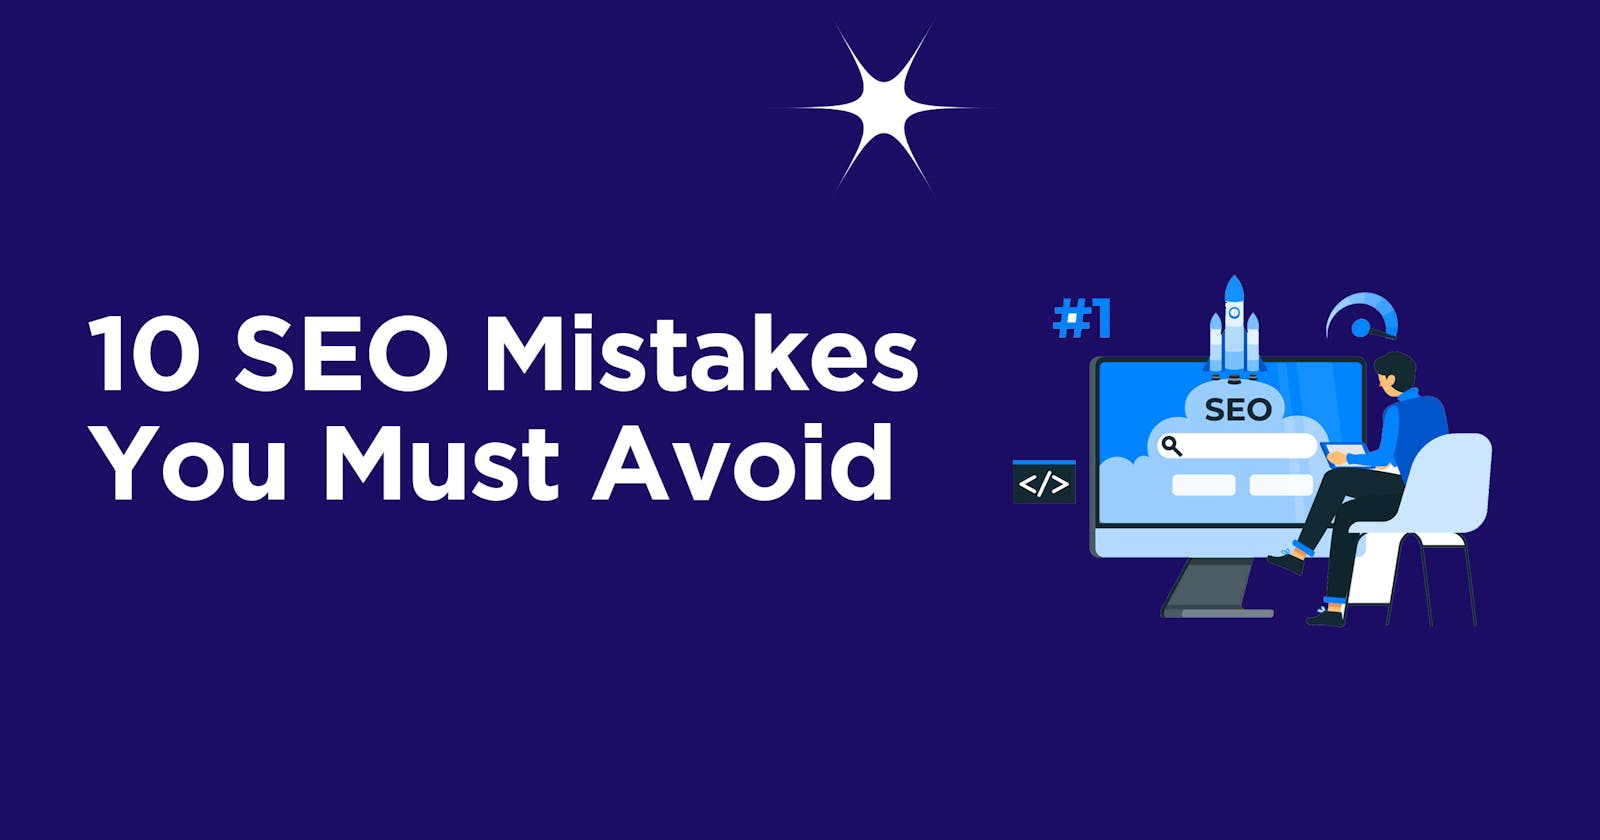 Top 10 SEO Mistakes You Must Avoid for Better Website Ranking